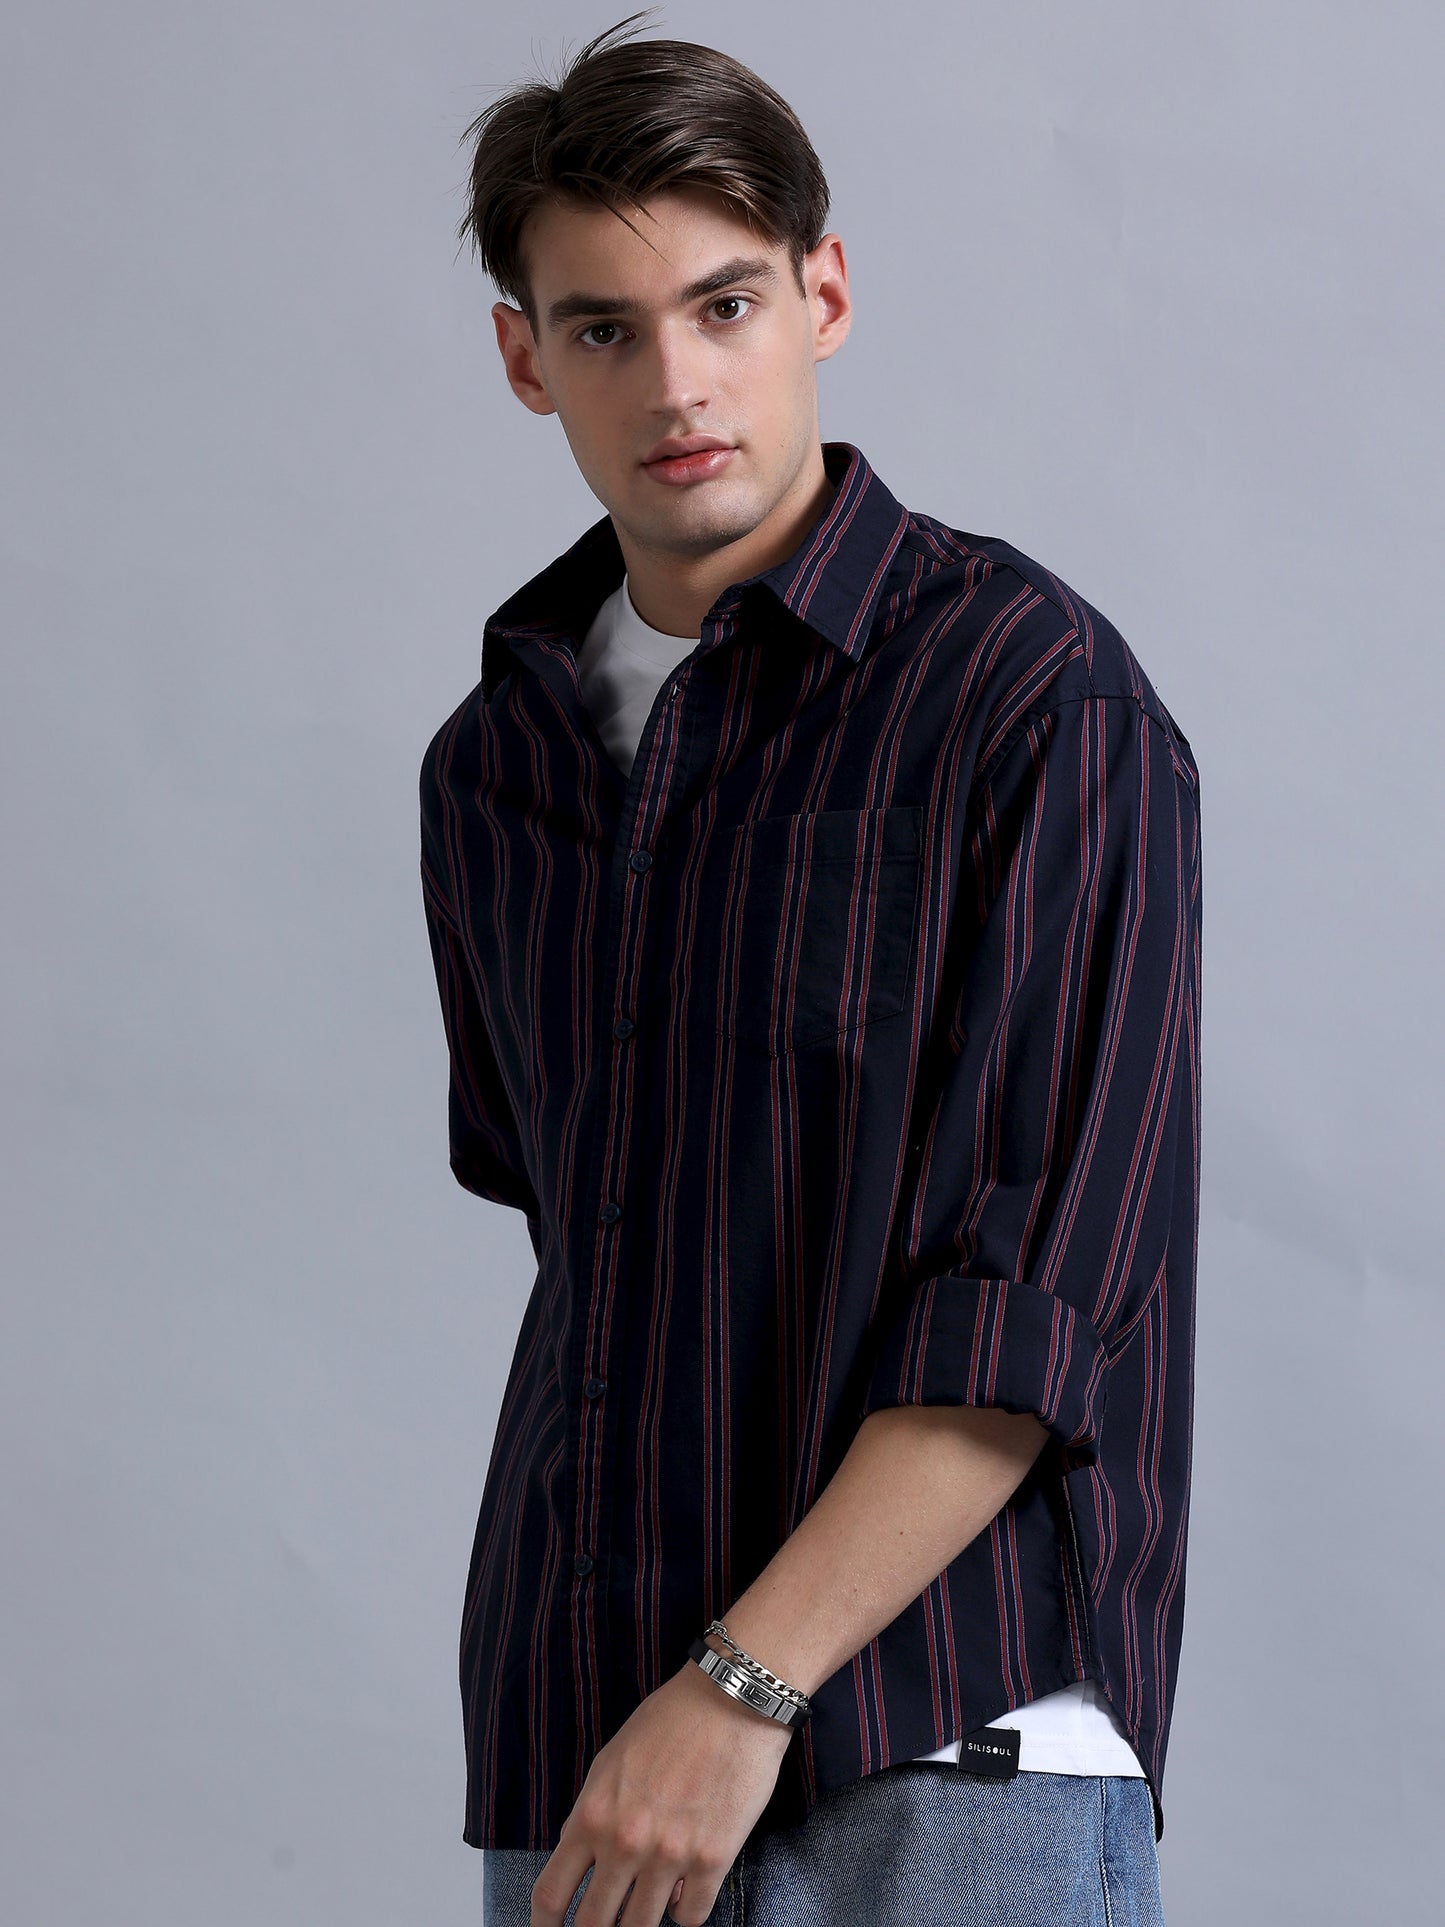 Premium Men Shirt, Relaxed Fit, Yarn Dyed Stripes, Pure Cotton, Full Sleeve, Navy Blue